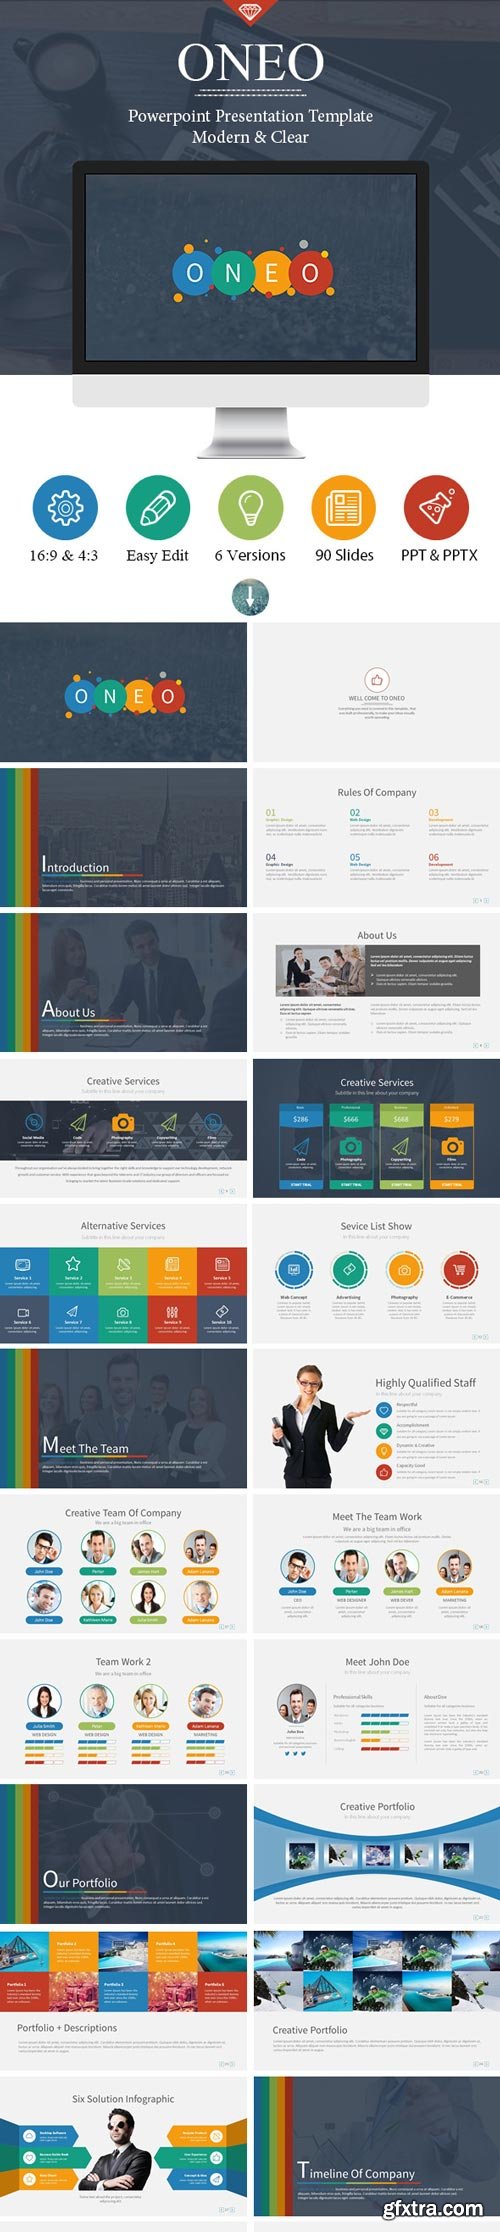 GraphicRiver - Oneo Powerpoint Template - 9954941